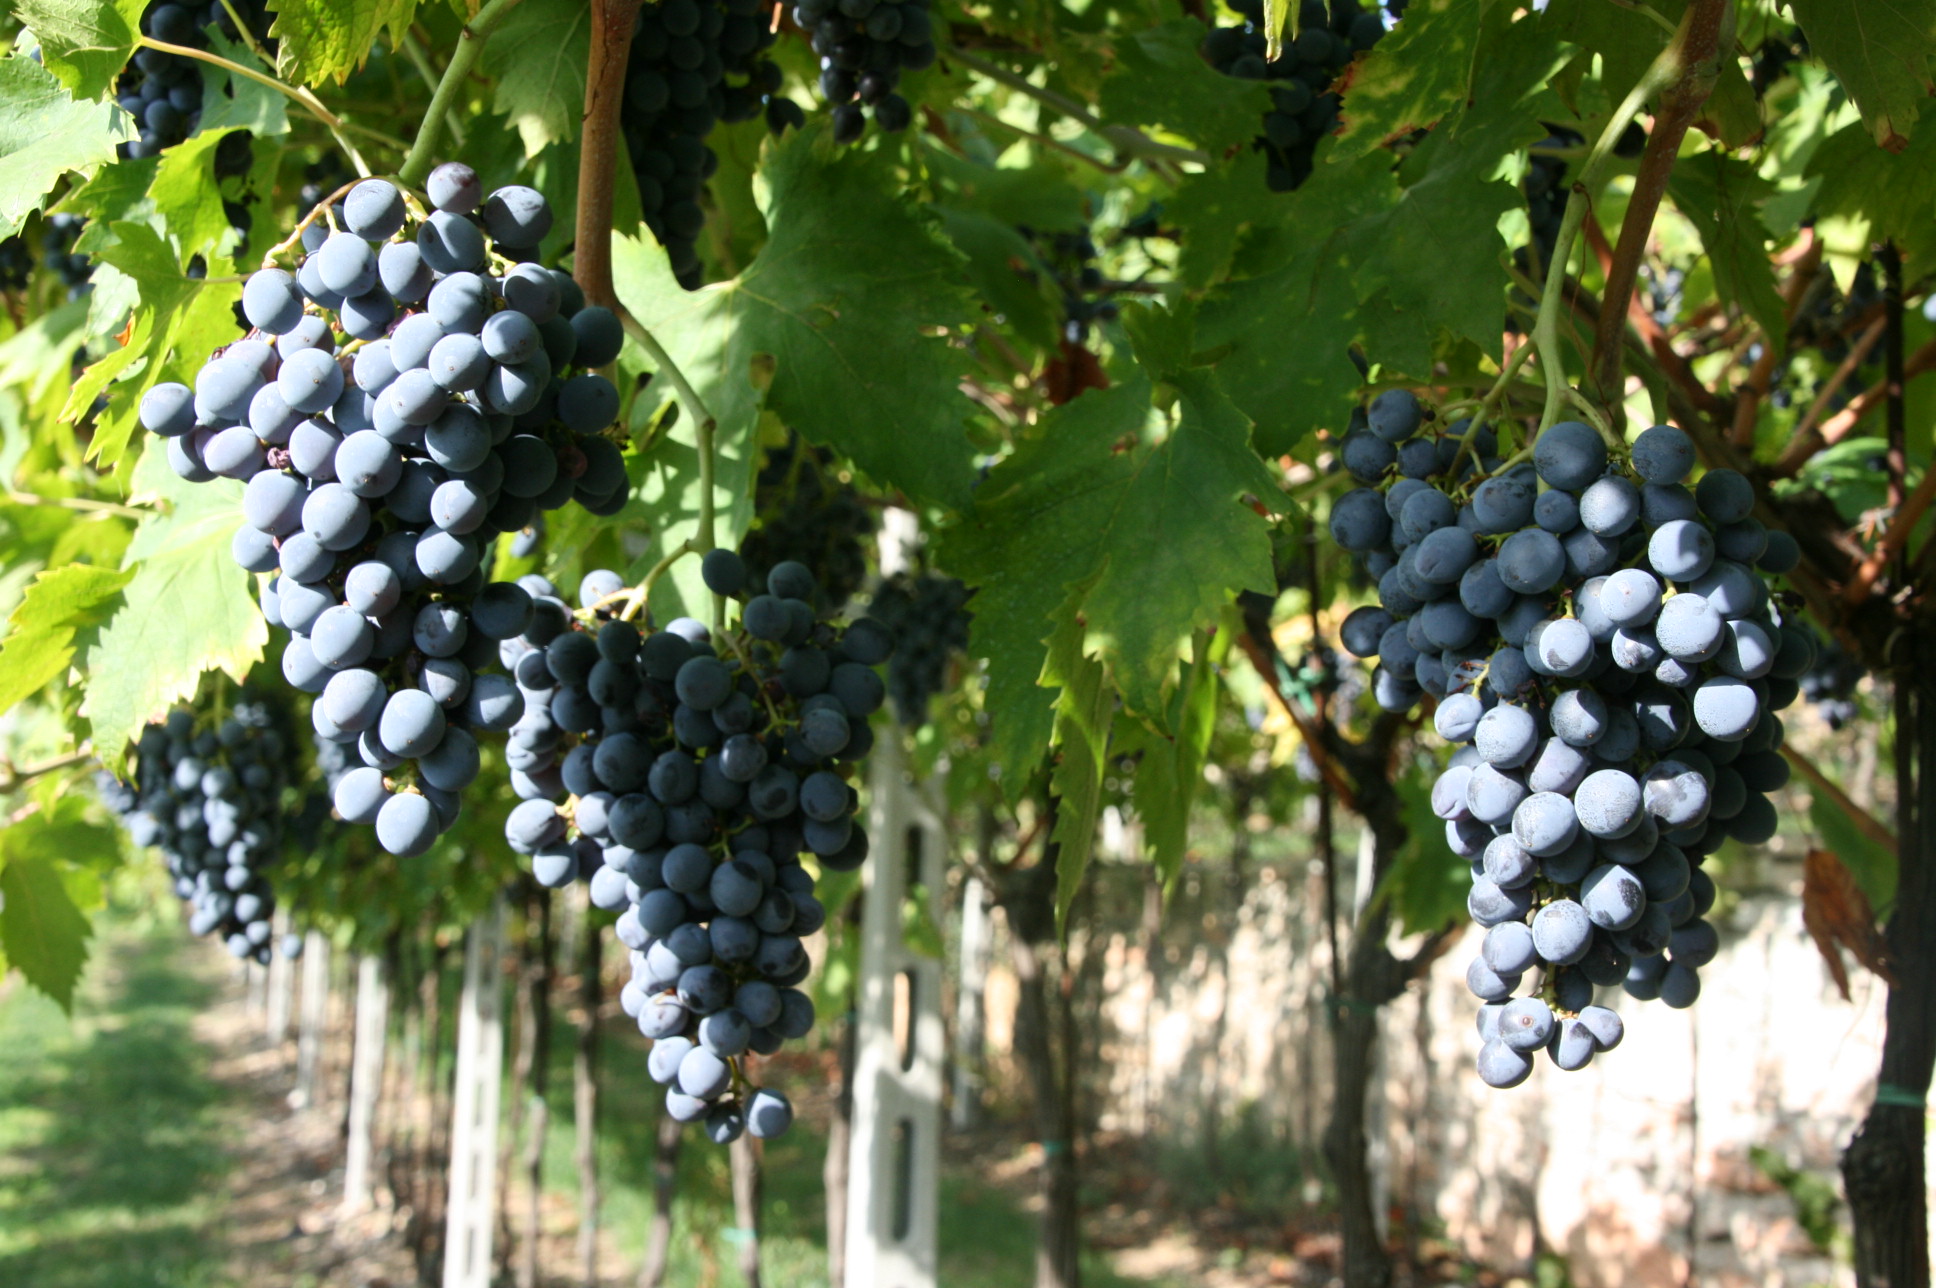 VINTAGE 2022: THE HIGH SUMMER TEMPERATURES GIVE QUALITY TO THE GRAPES IN VALPOLICELLA